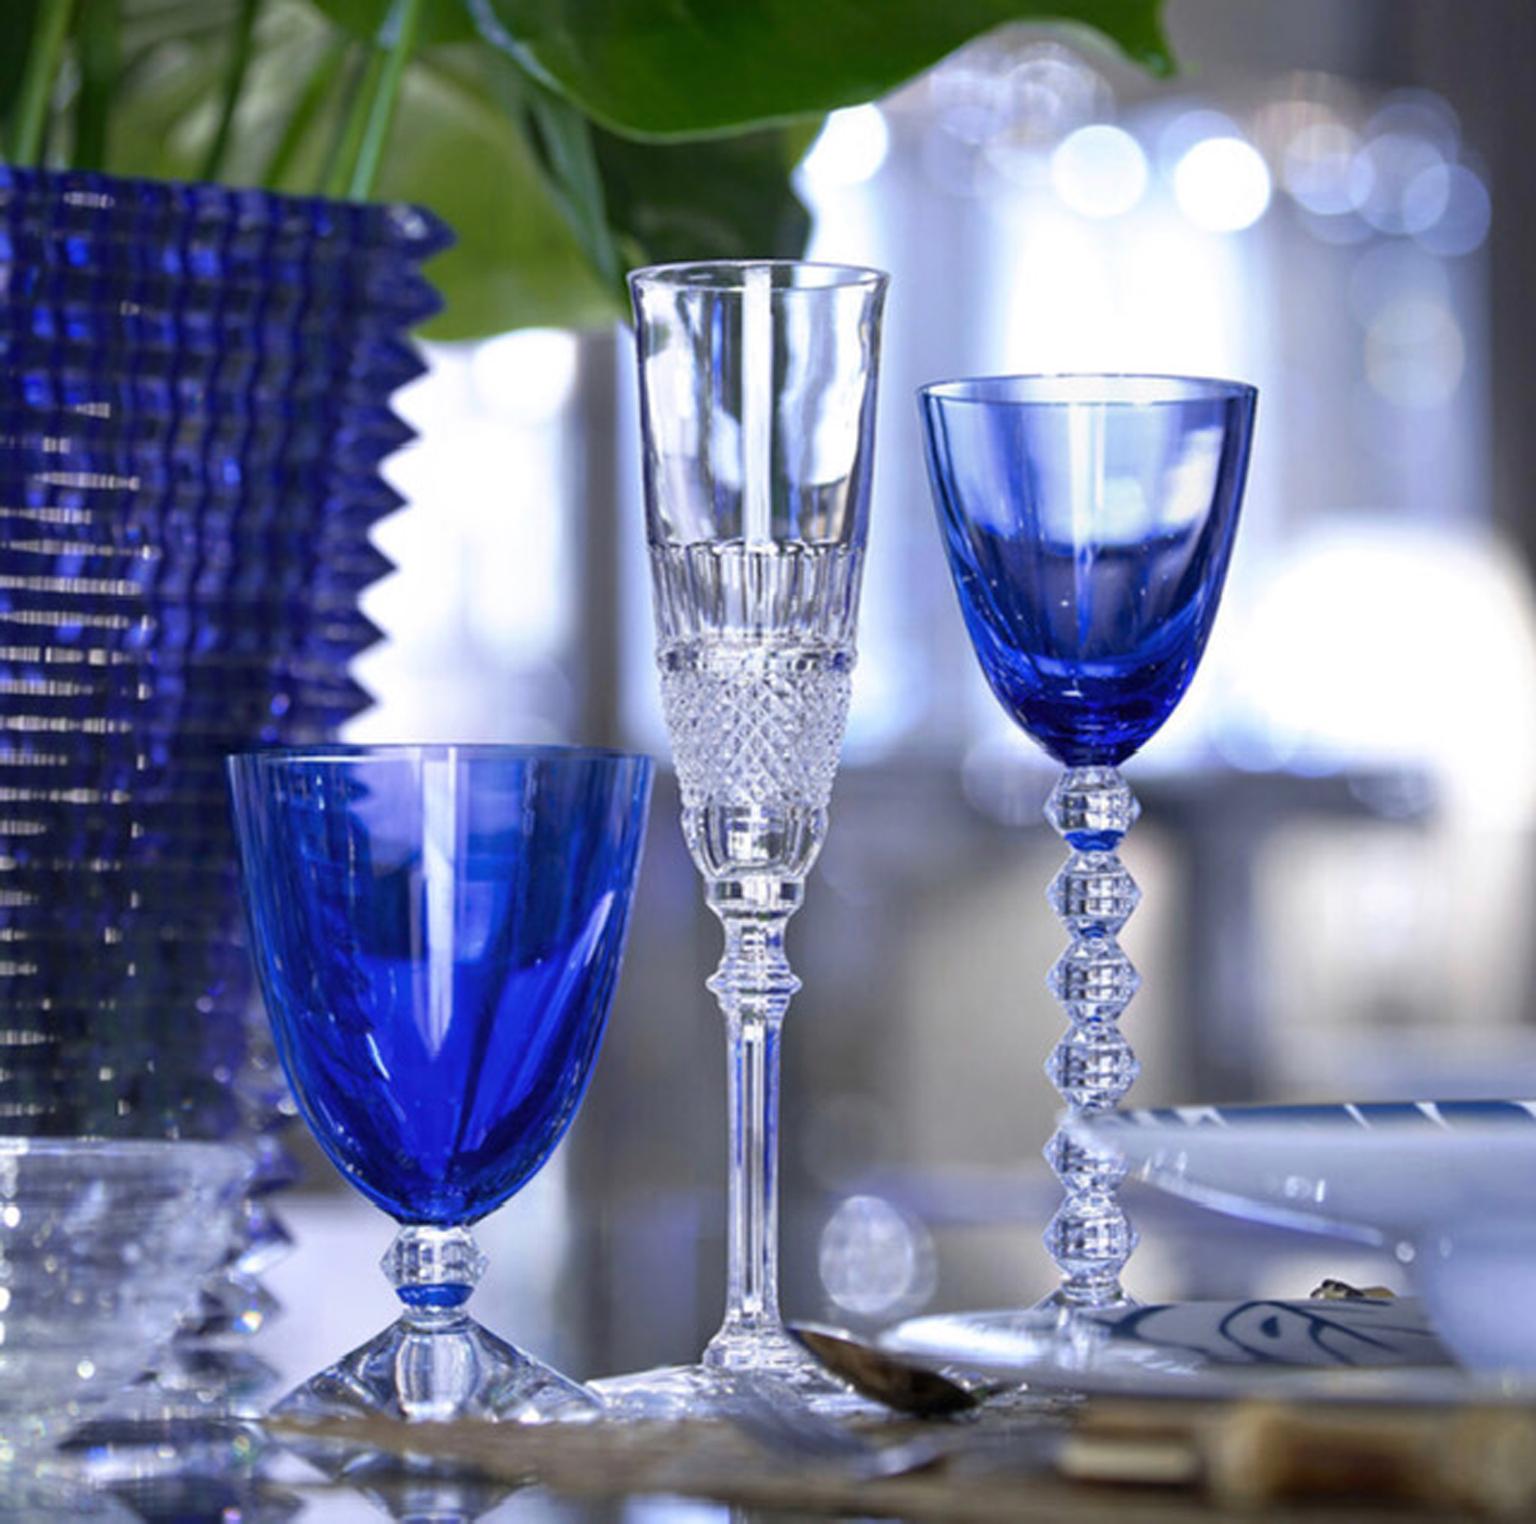 Pair of Baccarat crystal water glasses light blue
Drinking in these crystal glasses it is a remarkable experience.